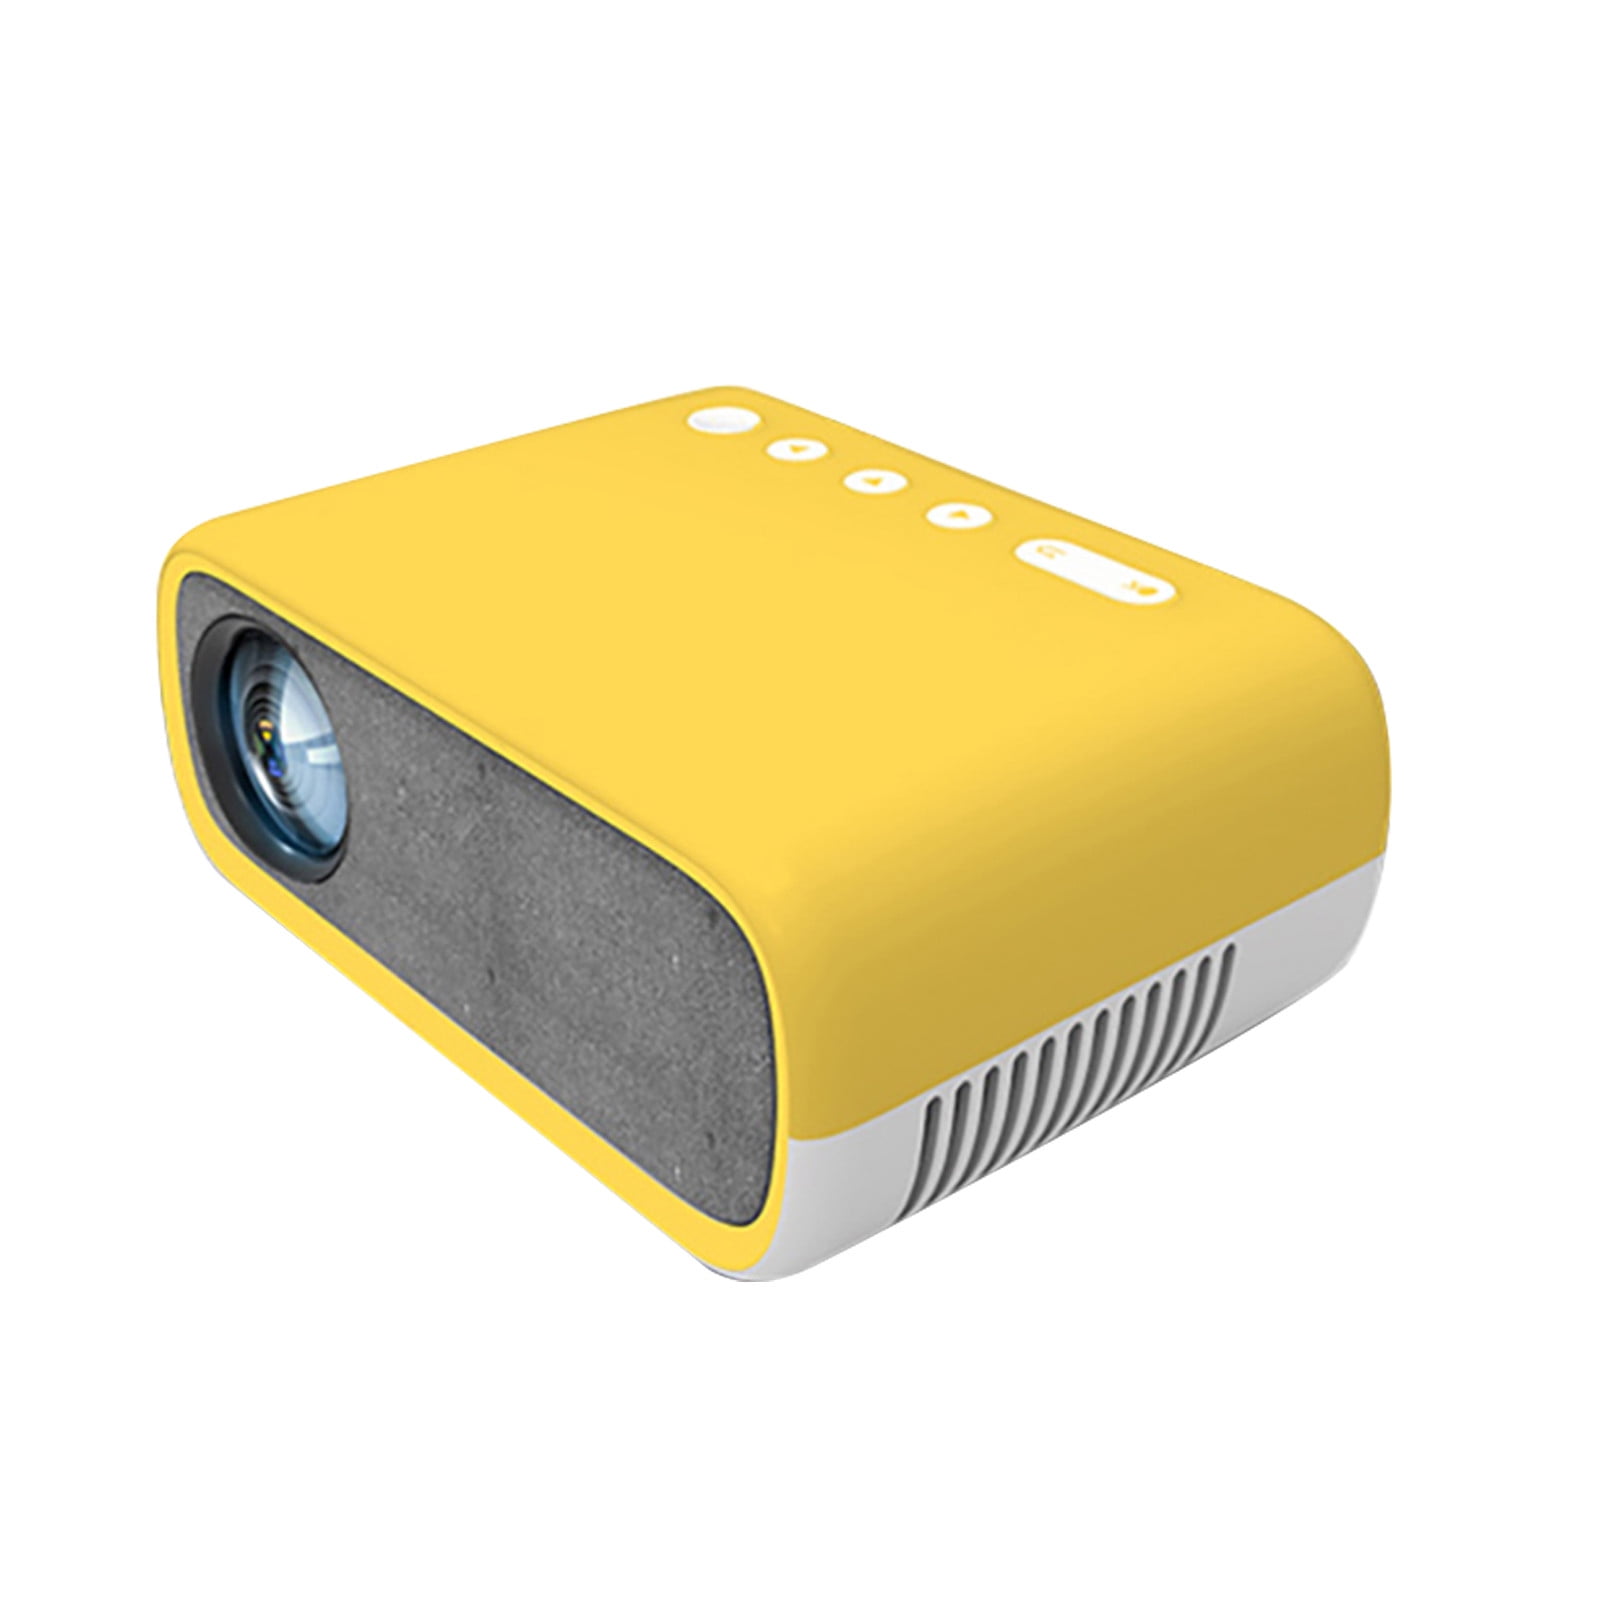 Tuscom Projector,1080P Full LED Video Projector Beamer Gifts for Family - Walmart.com